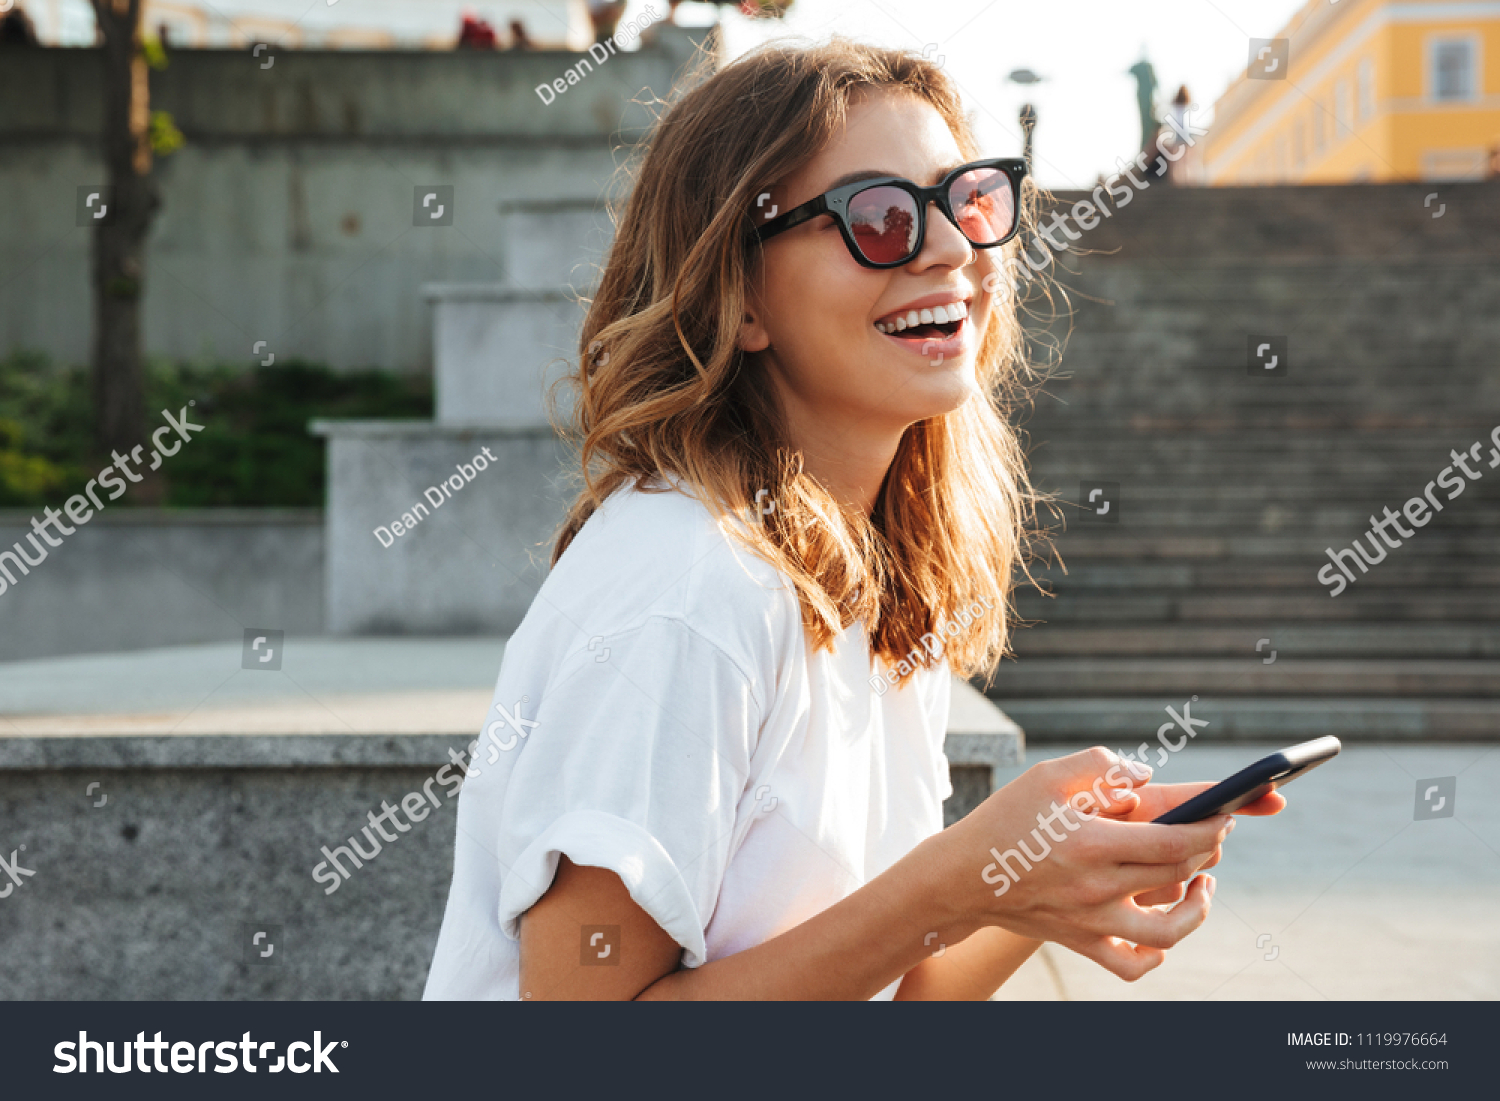 Picture of european brunette woman wearing casual summer outfit and sunglasses laughing while walking through city street with smartphone in hands #1119976664